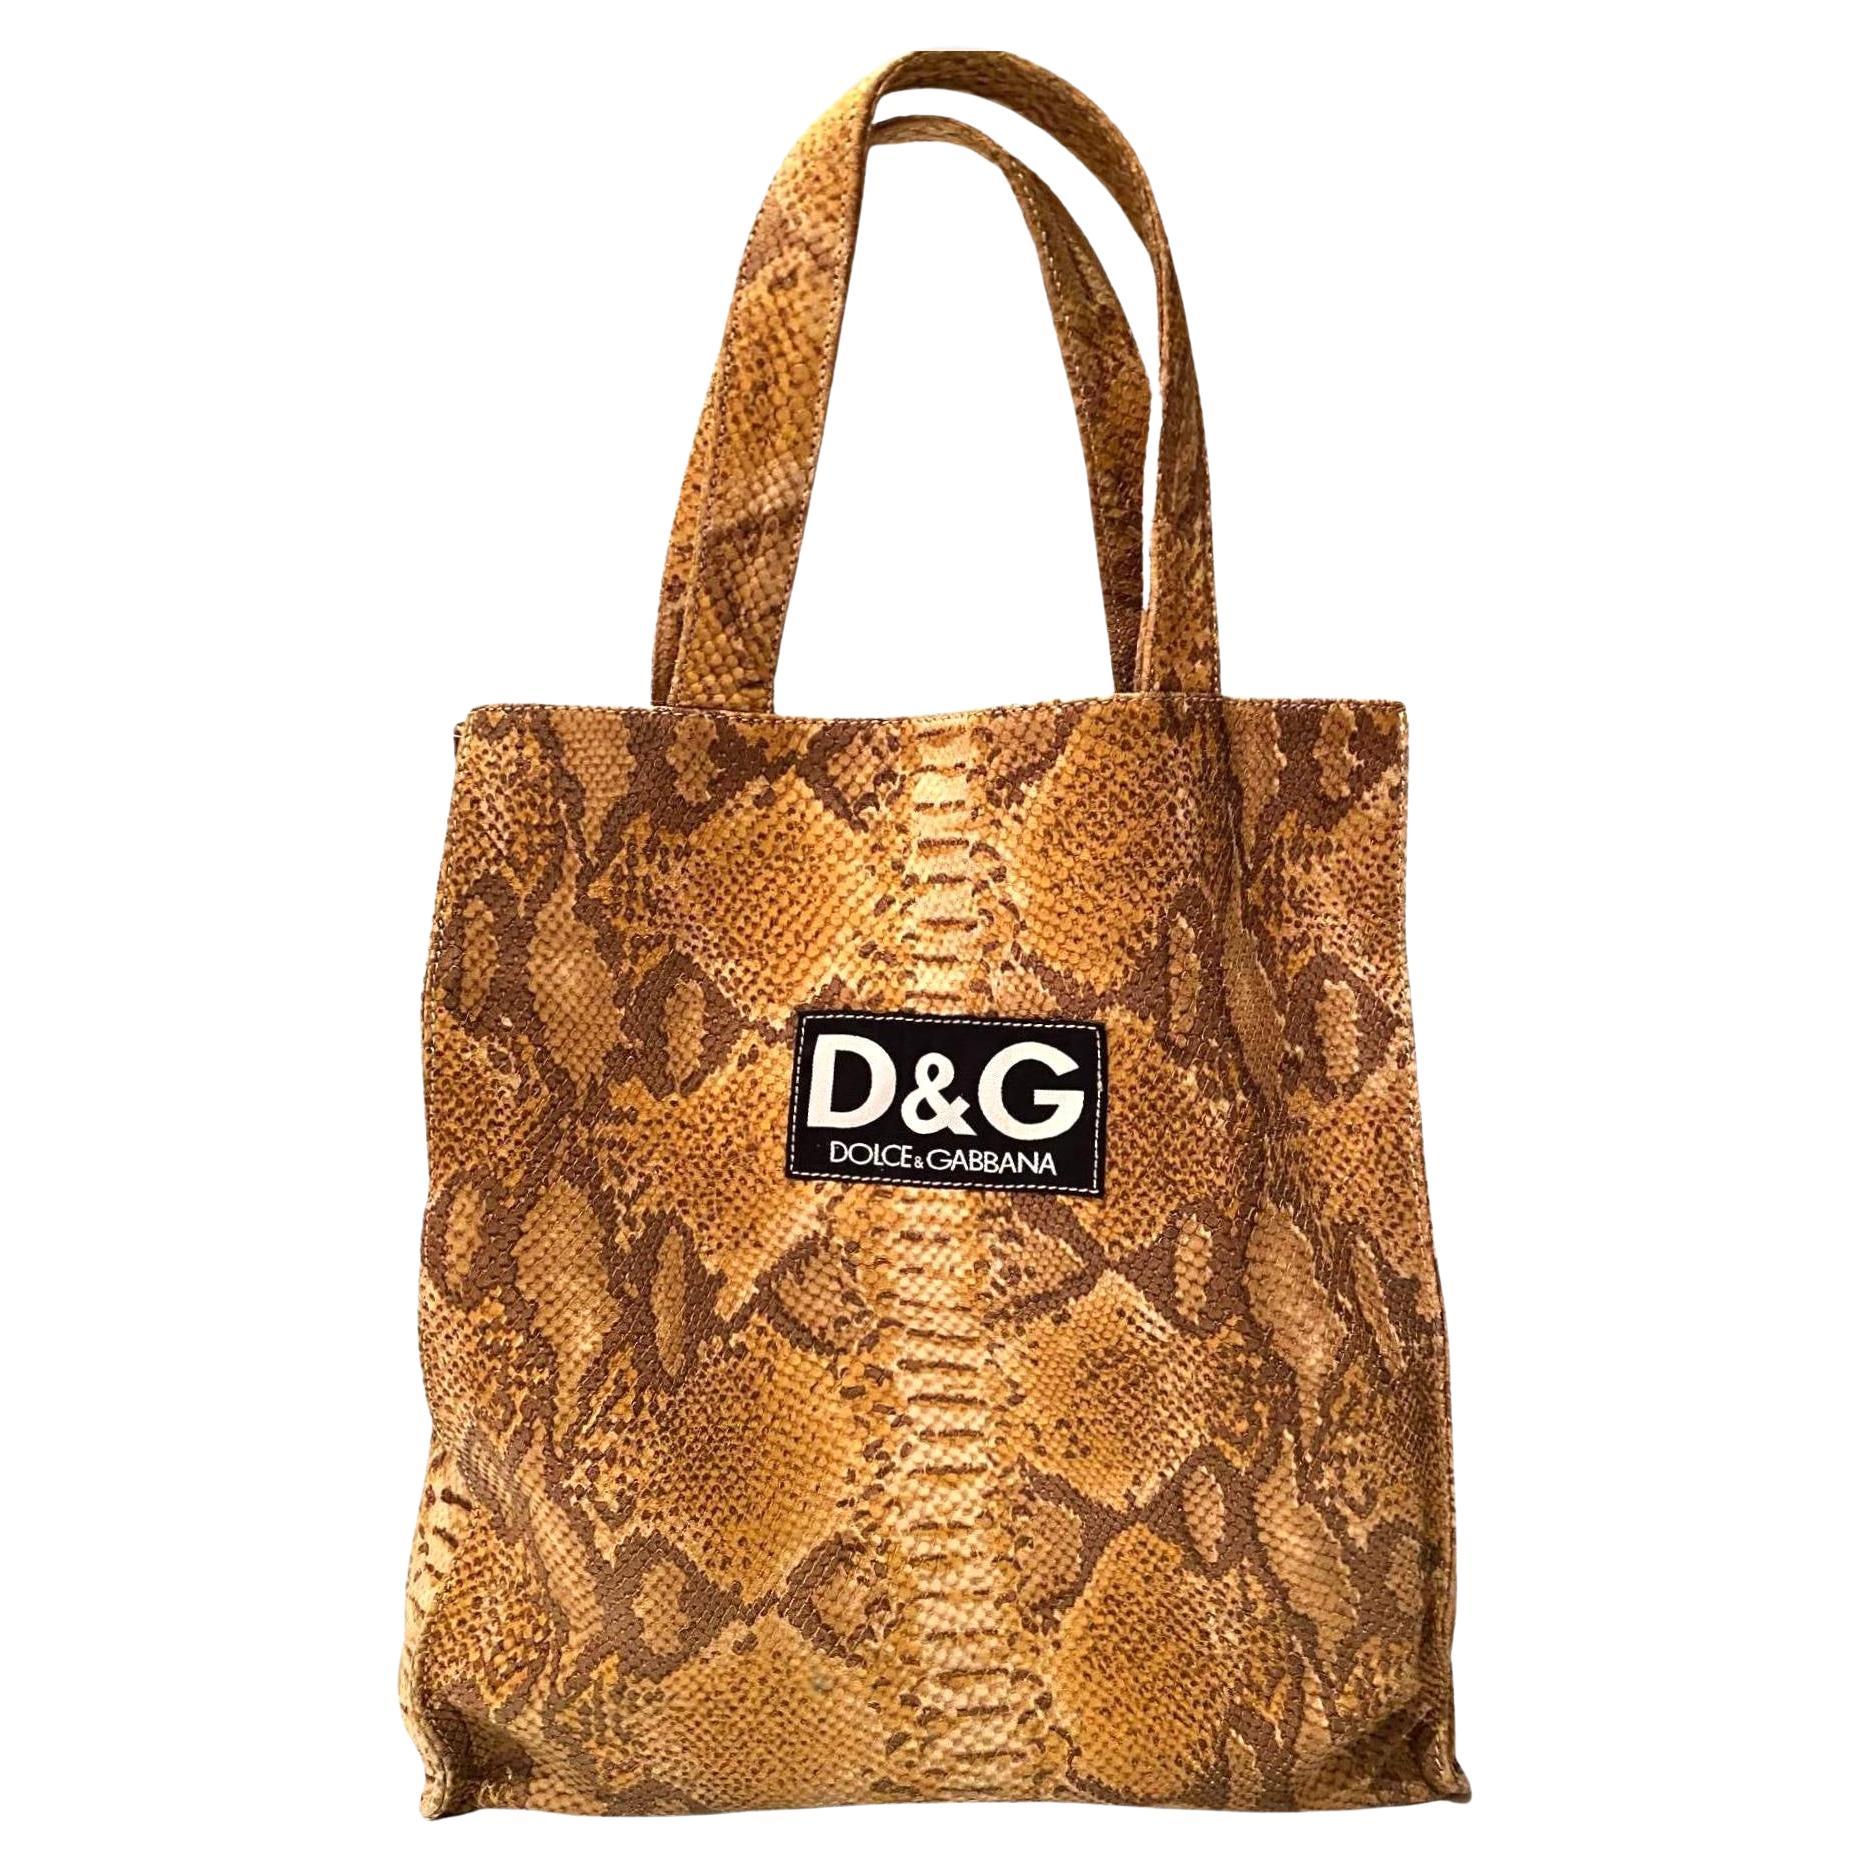 1990s D&G Dolce Gabbana Brown Leather Snake Print Shopper Tote Bag For Sale